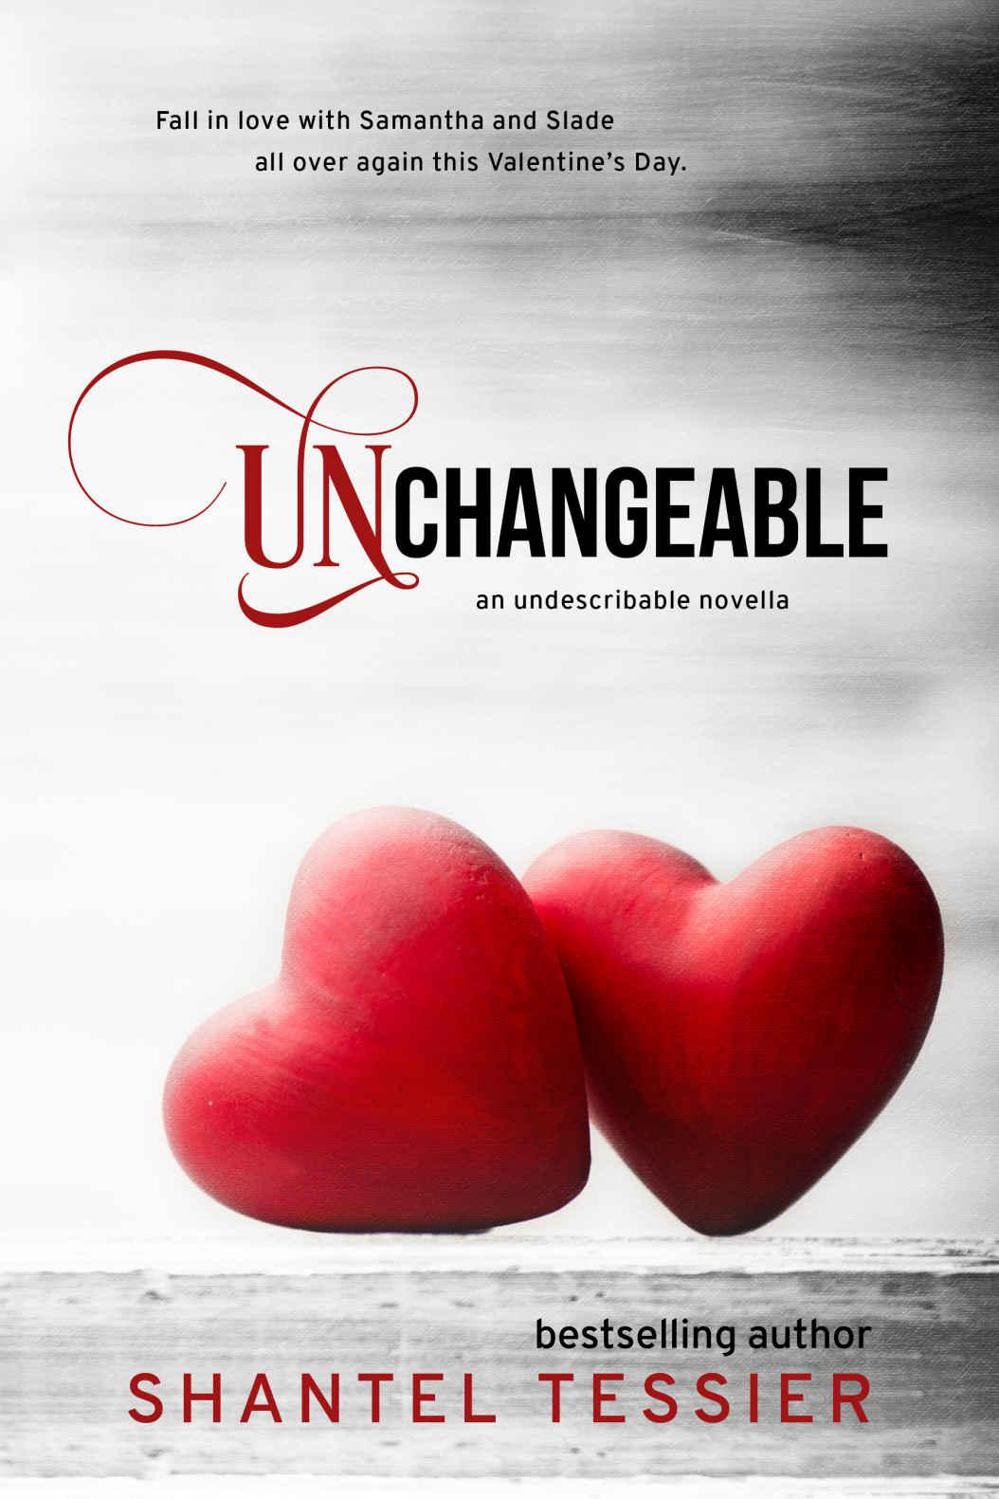 Unchangeable (Undescribable Book 4) by Shantel Tessier